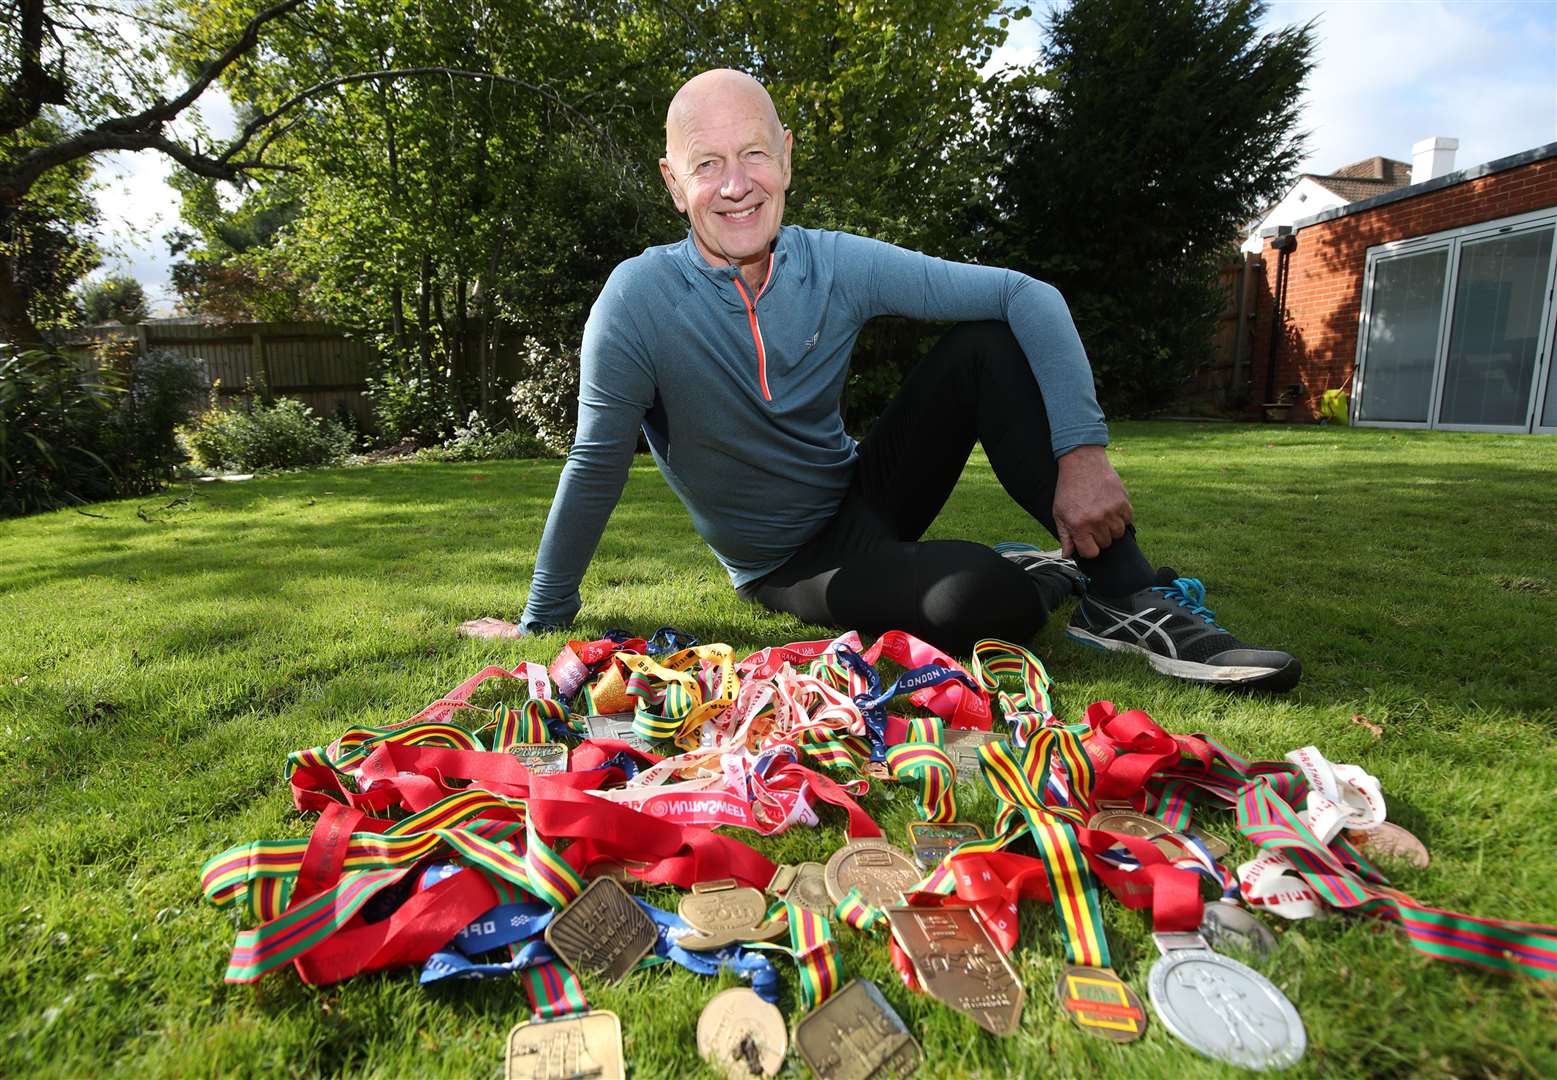 Terry Macey with his London Marathon medals at his home in Blackheath, south east London (Yui Mok/PA)